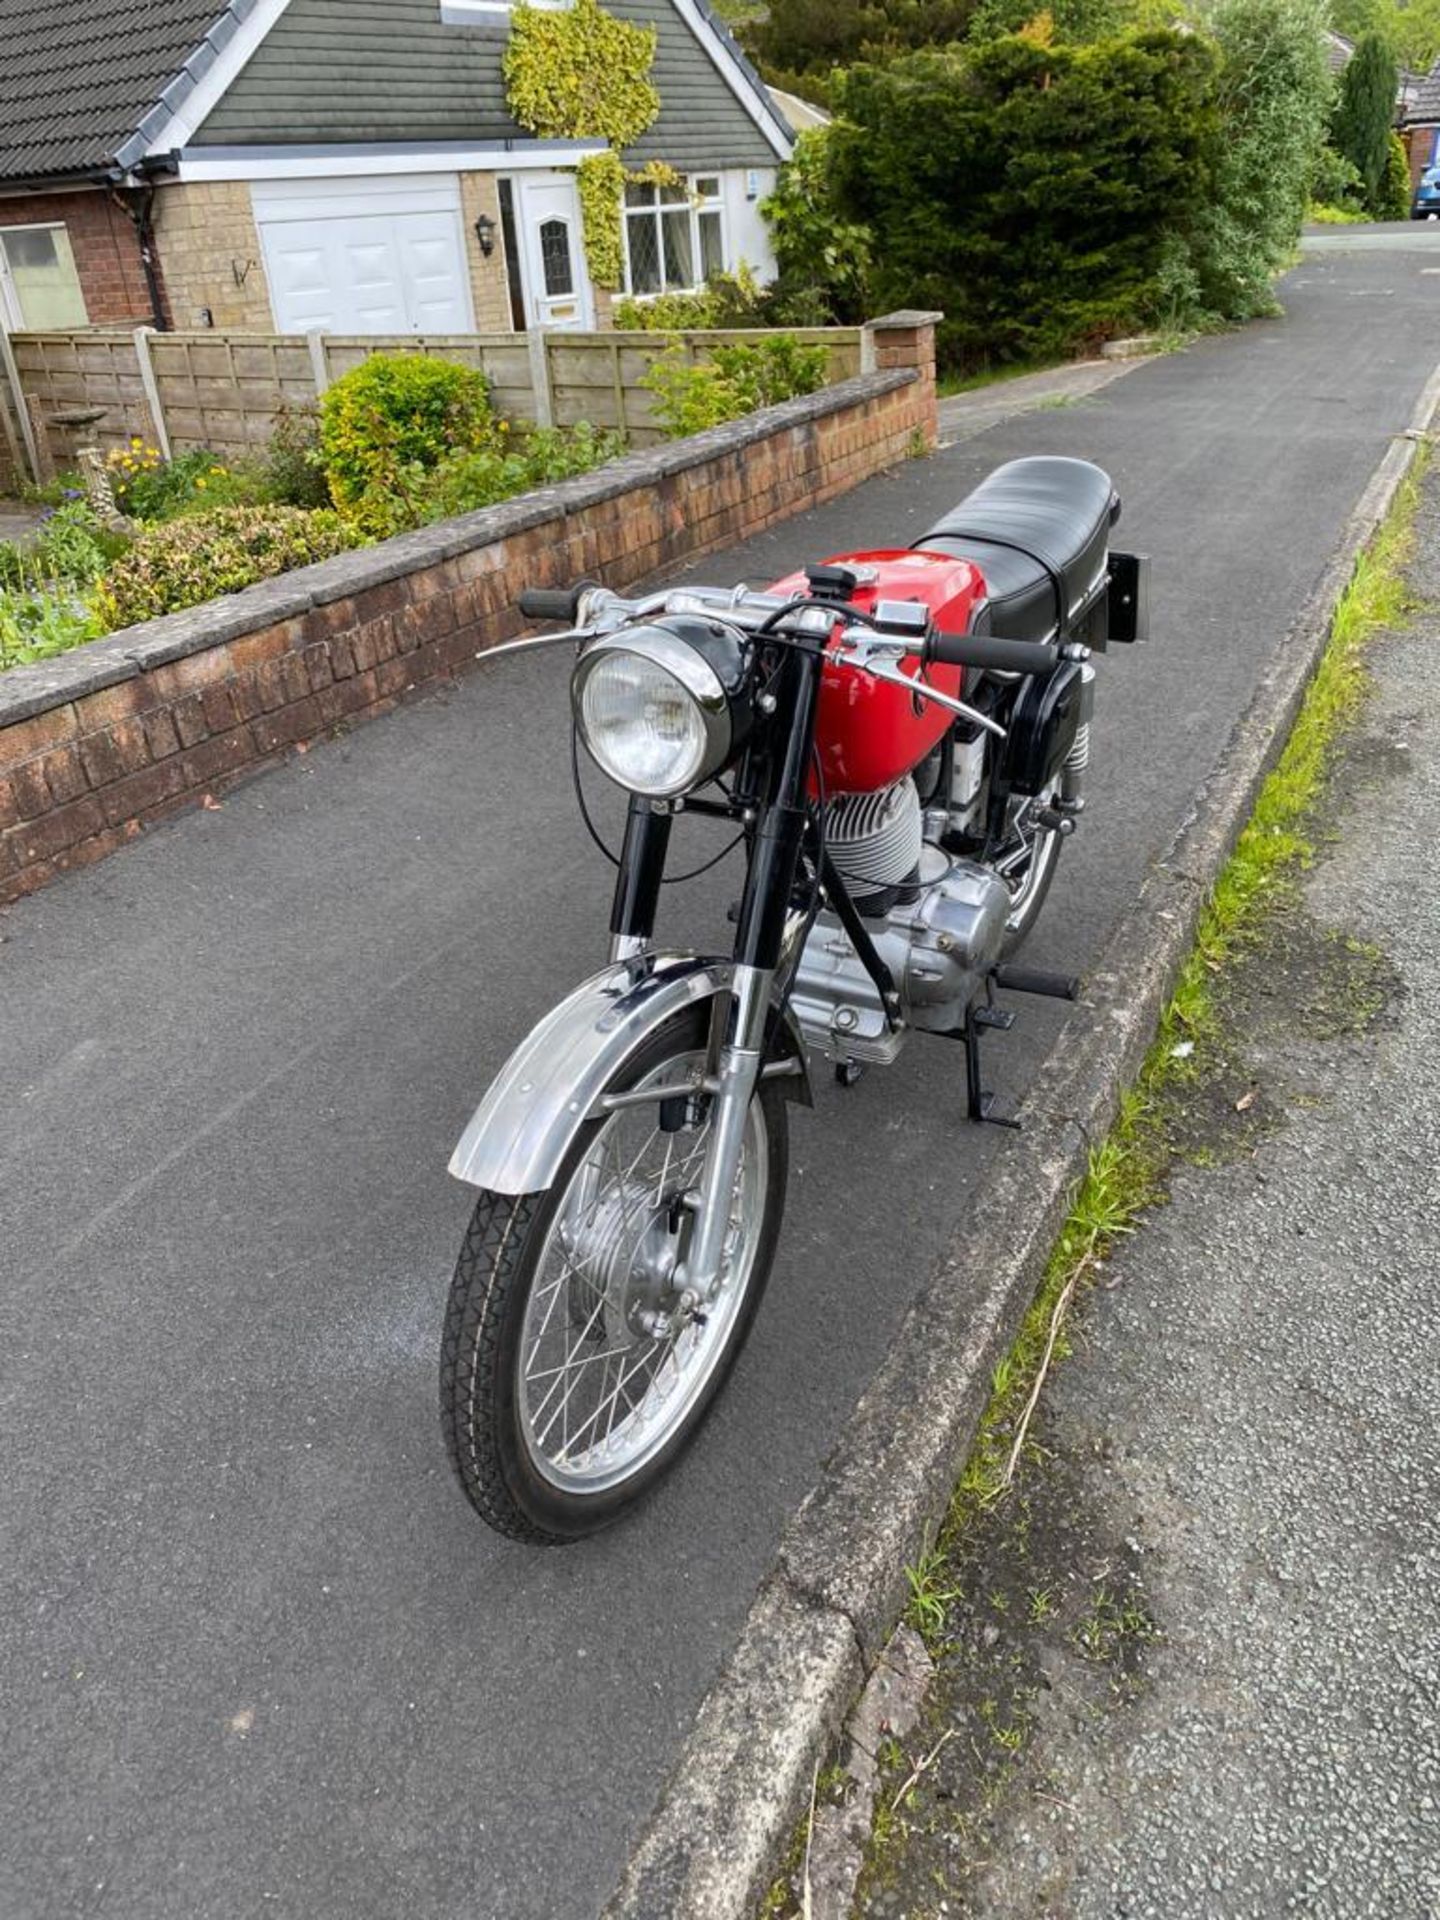 A 1966 GILERA 124 SPORT MOTORCYCLE, OHV, 5 SPEED, MATCHING FACTORY NUMBERS, IMPORTED IN APPROX - Image 4 of 5